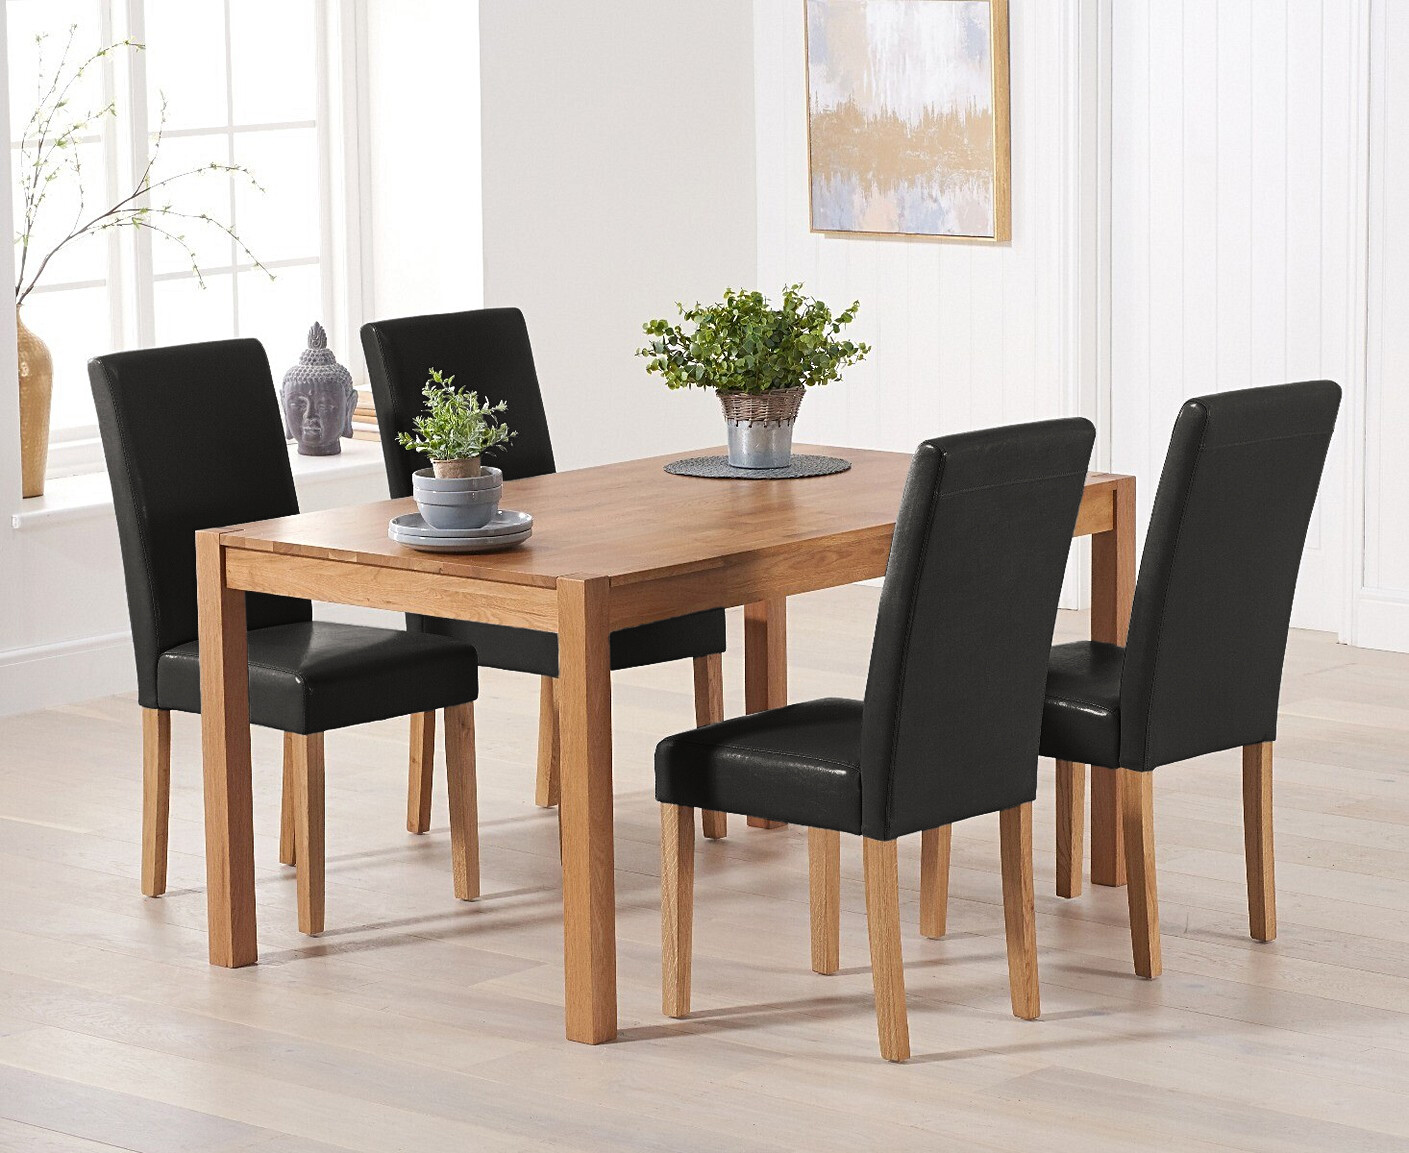 York 120cm Solid Oak Dining Table With 4 Black Olivia Chairs